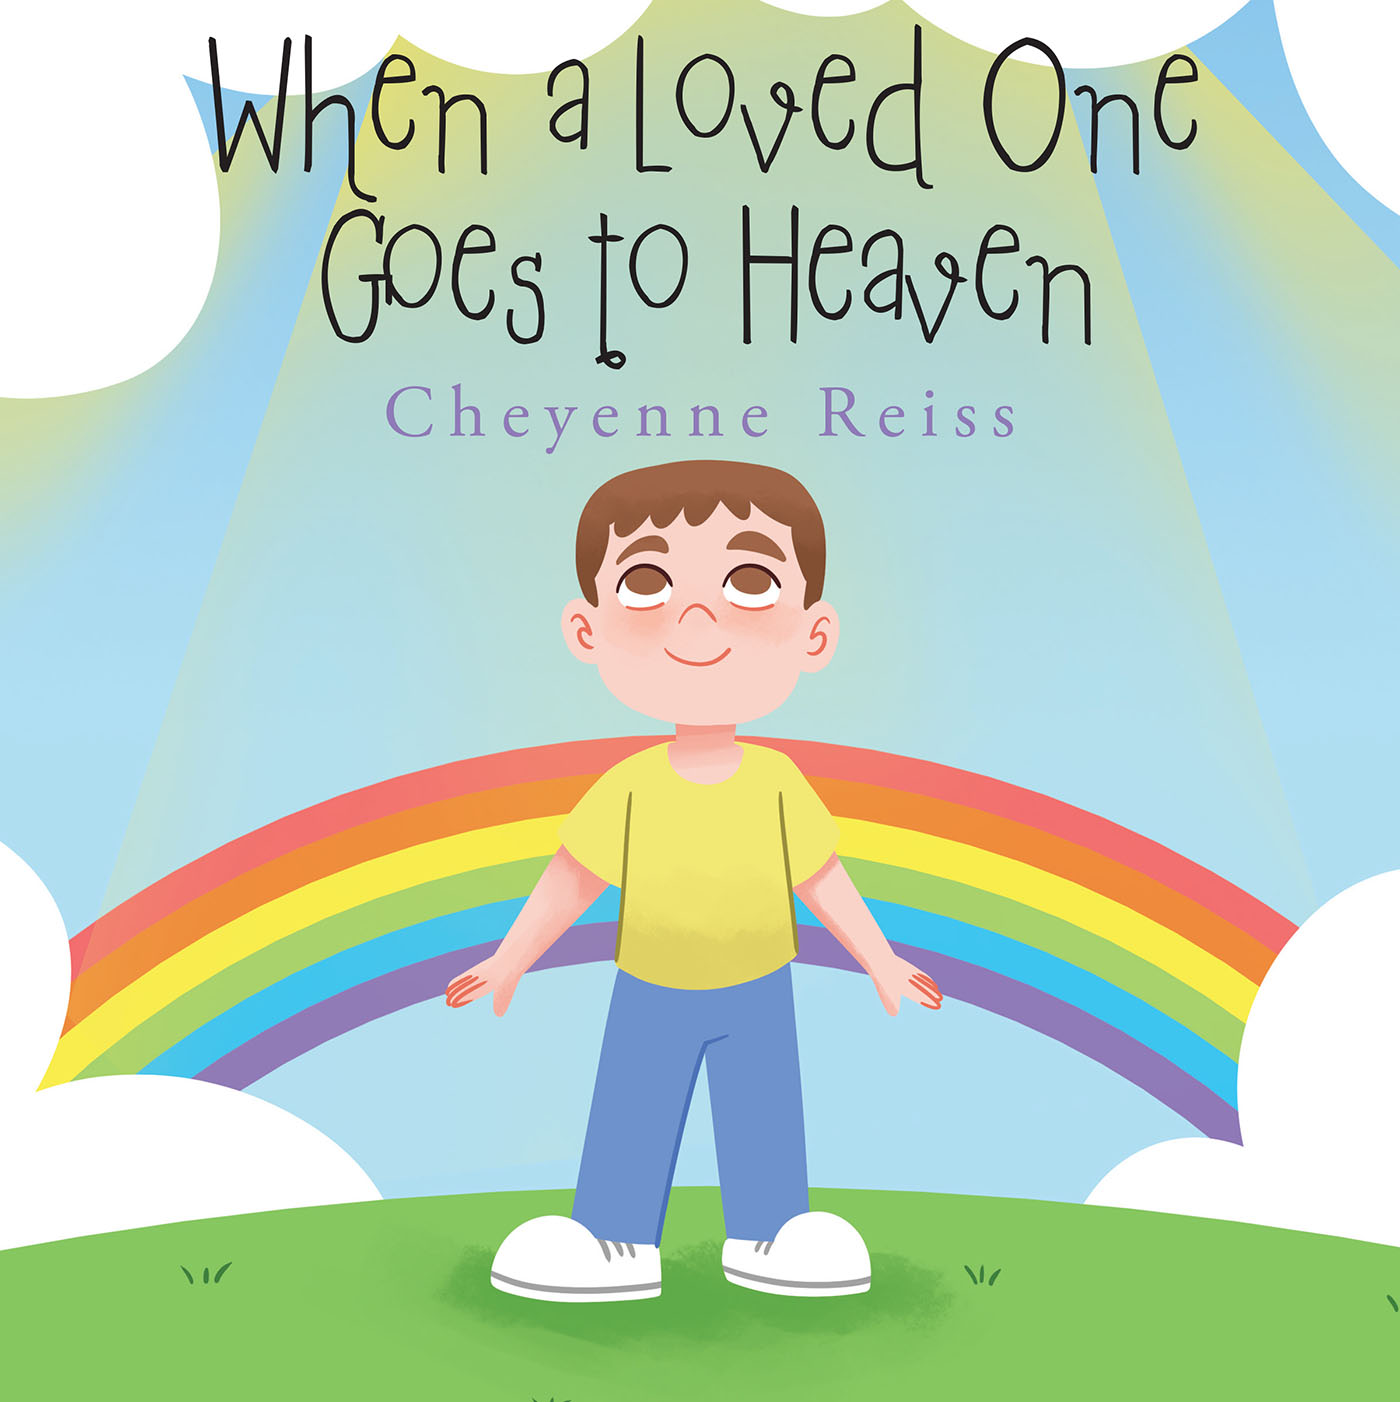 Cheyenne Reiss’s Newly Released "When a Loved One Goes to Heaven" is a Touching Keepsake That Helps Young Readers Process the Loss of a Loved One